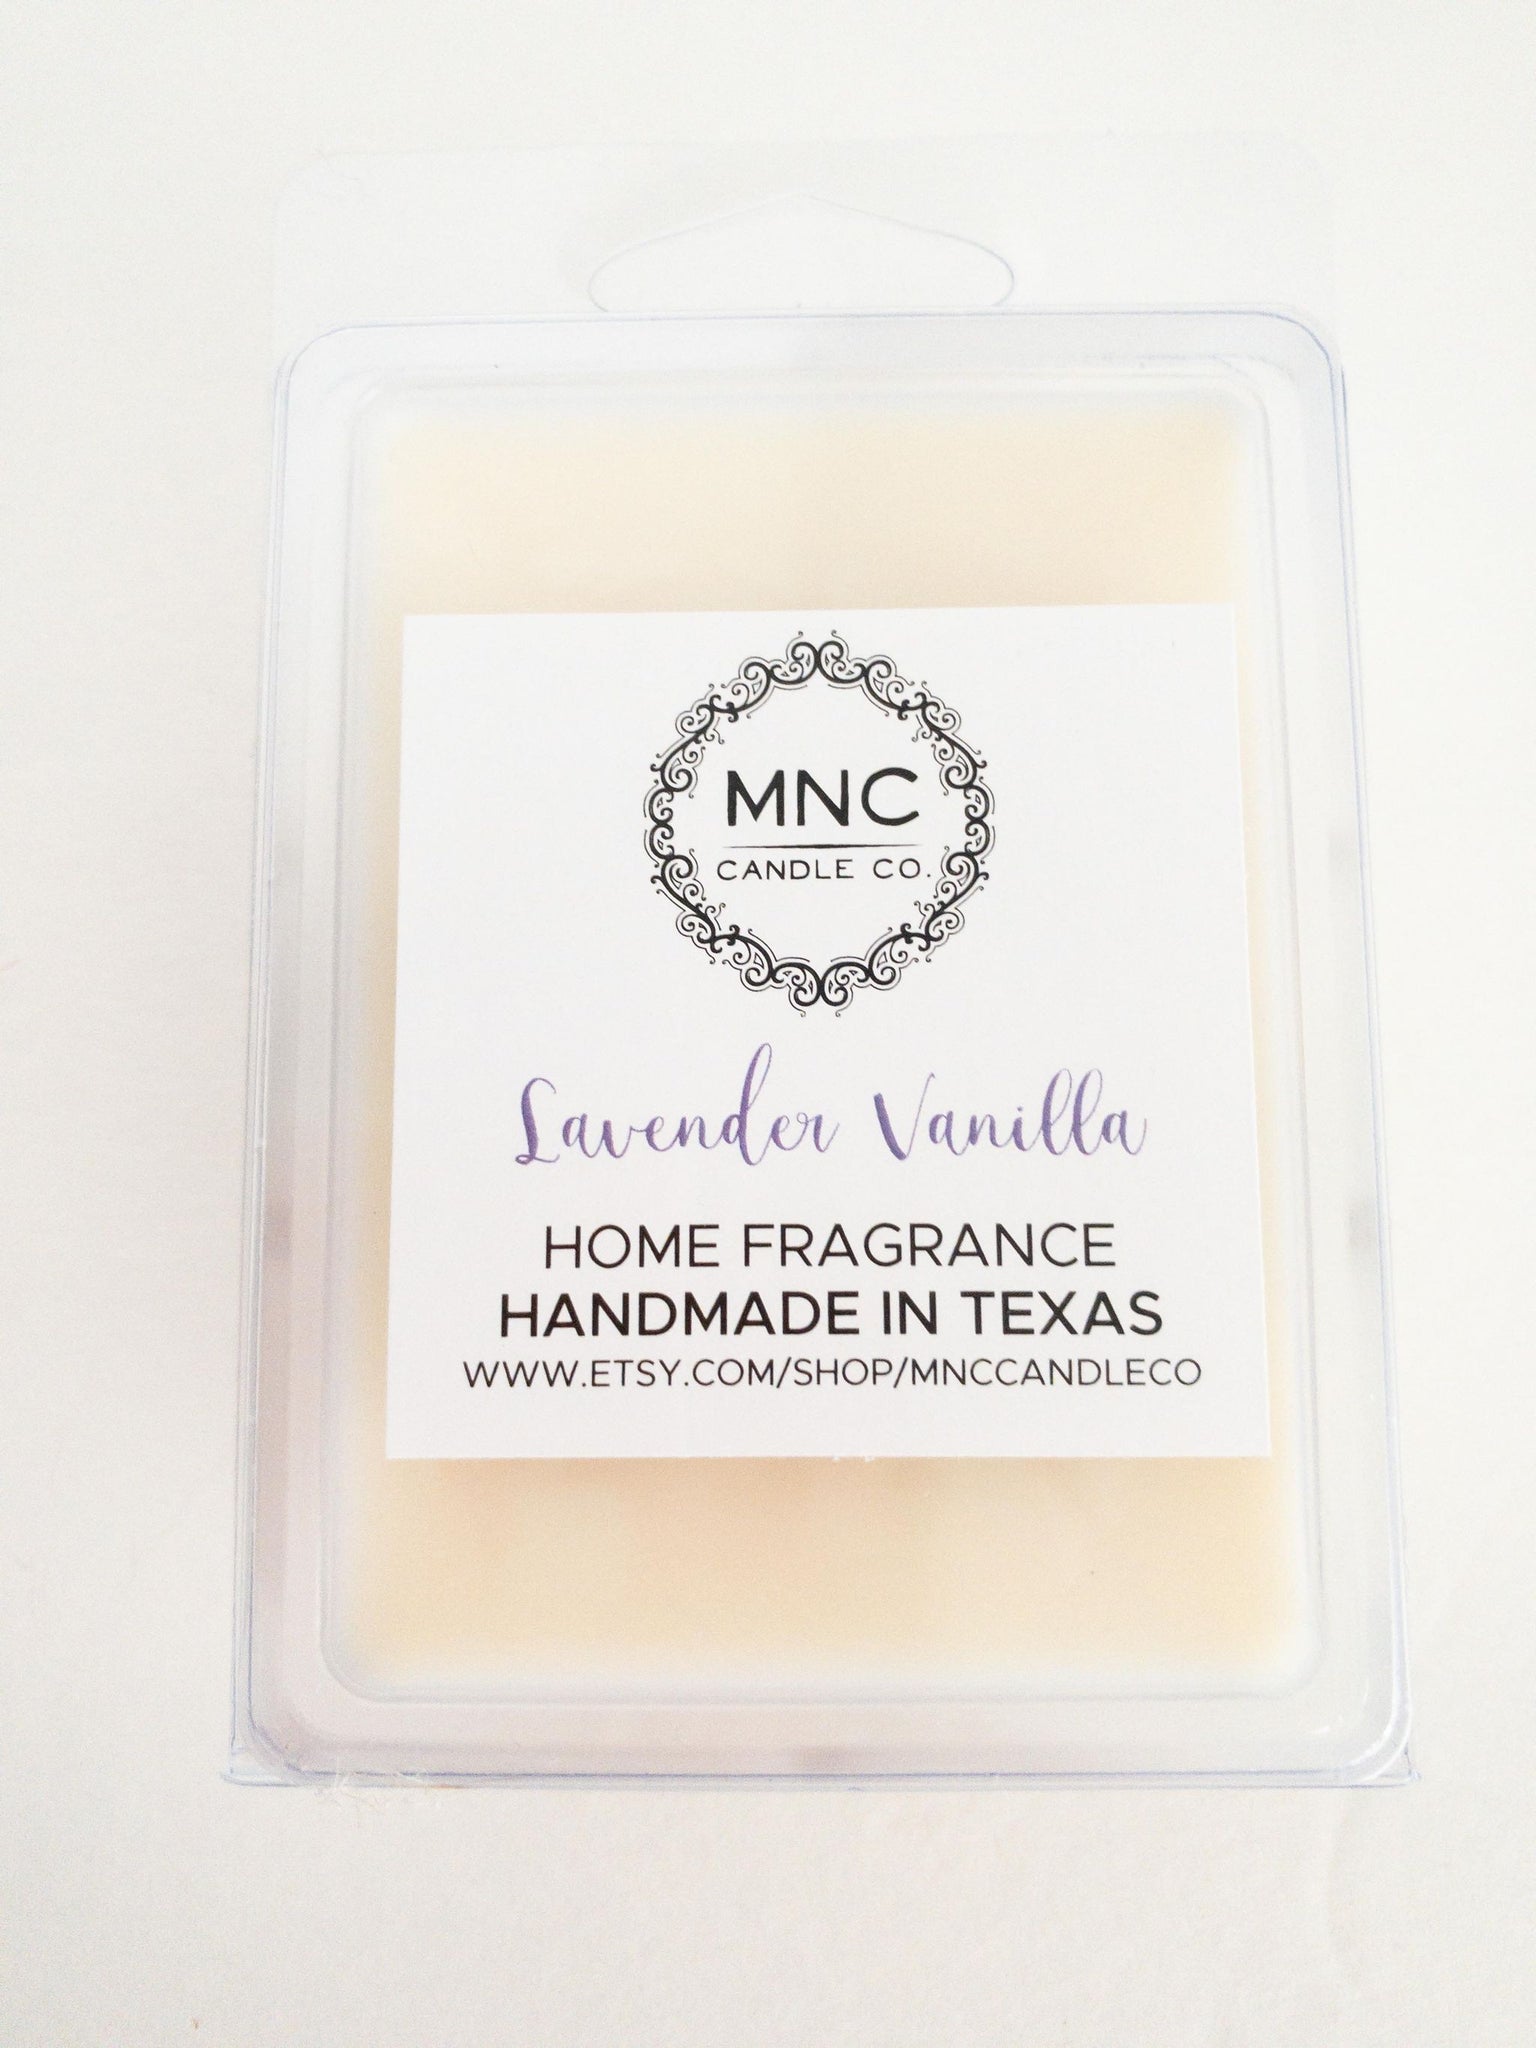 Spring Branch Candle Co. / Original / HIGHLY SCENTED Soy Wax Melts